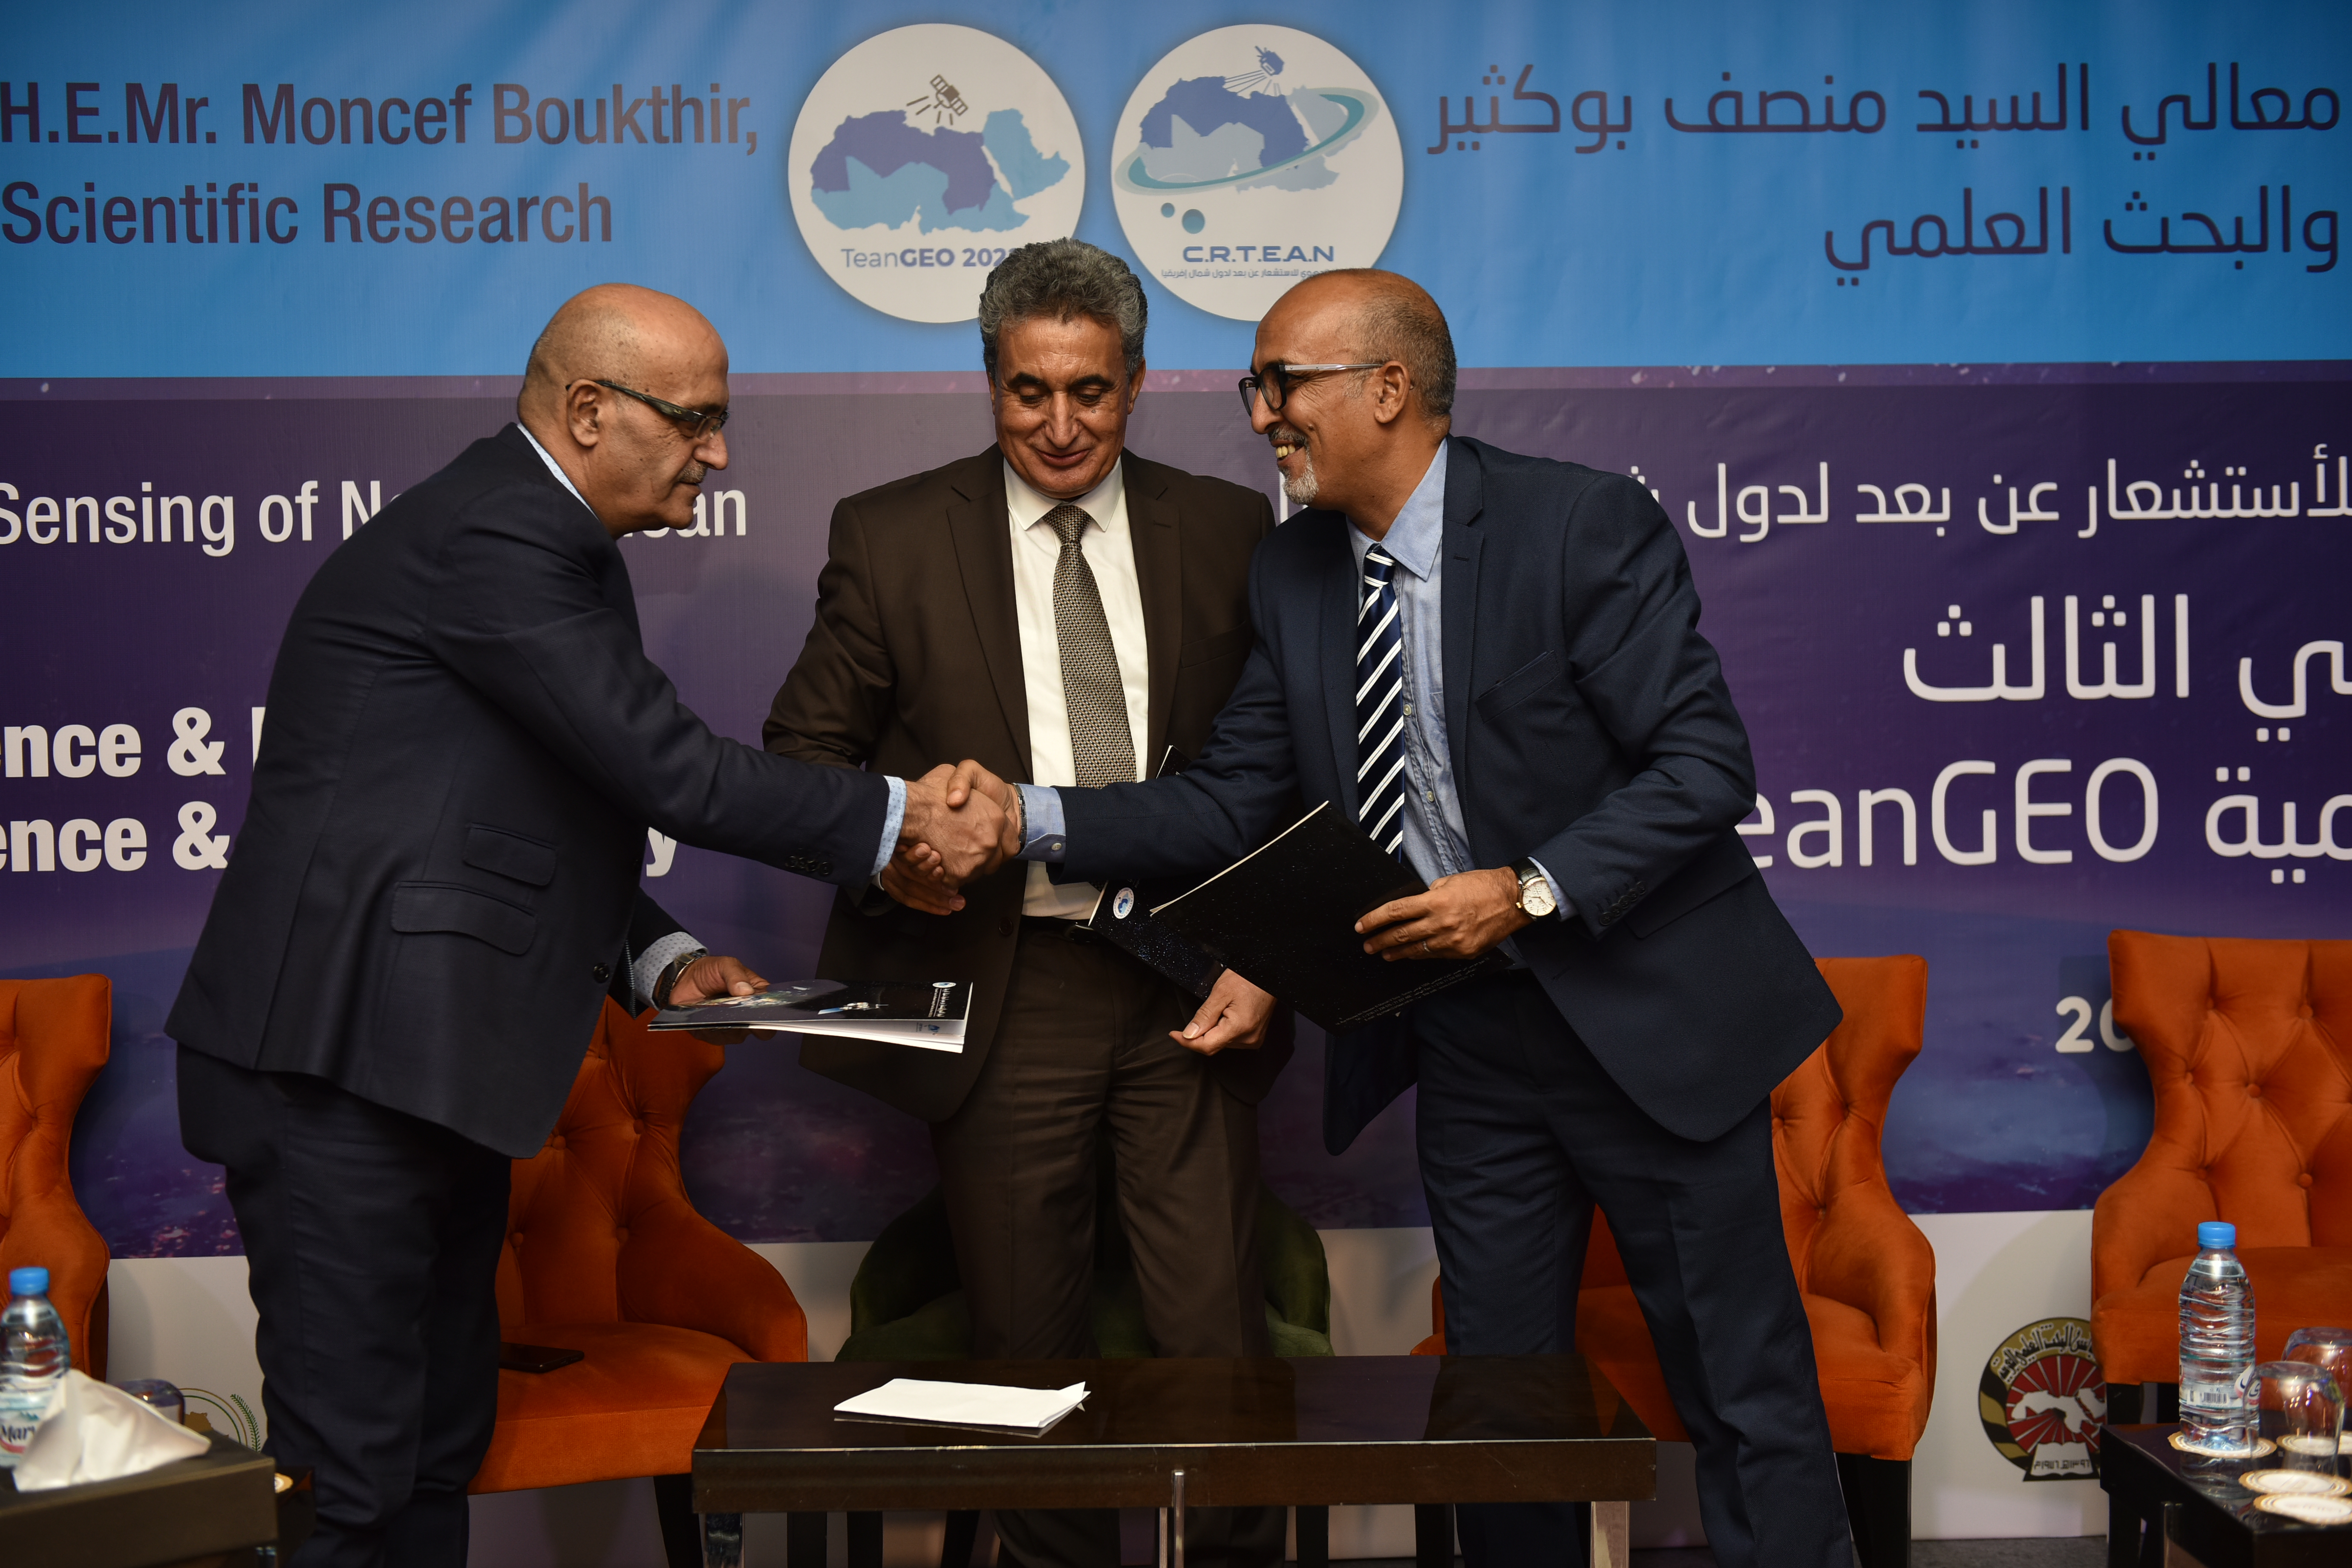  Memorandum of Understanding Between the Arab Organization for Agricultural Development (AOAD), the Sahara and Sahel Observatory (OSS), and the Regional Center for Remote Sensing of North African States (CRTEAN), October 2022